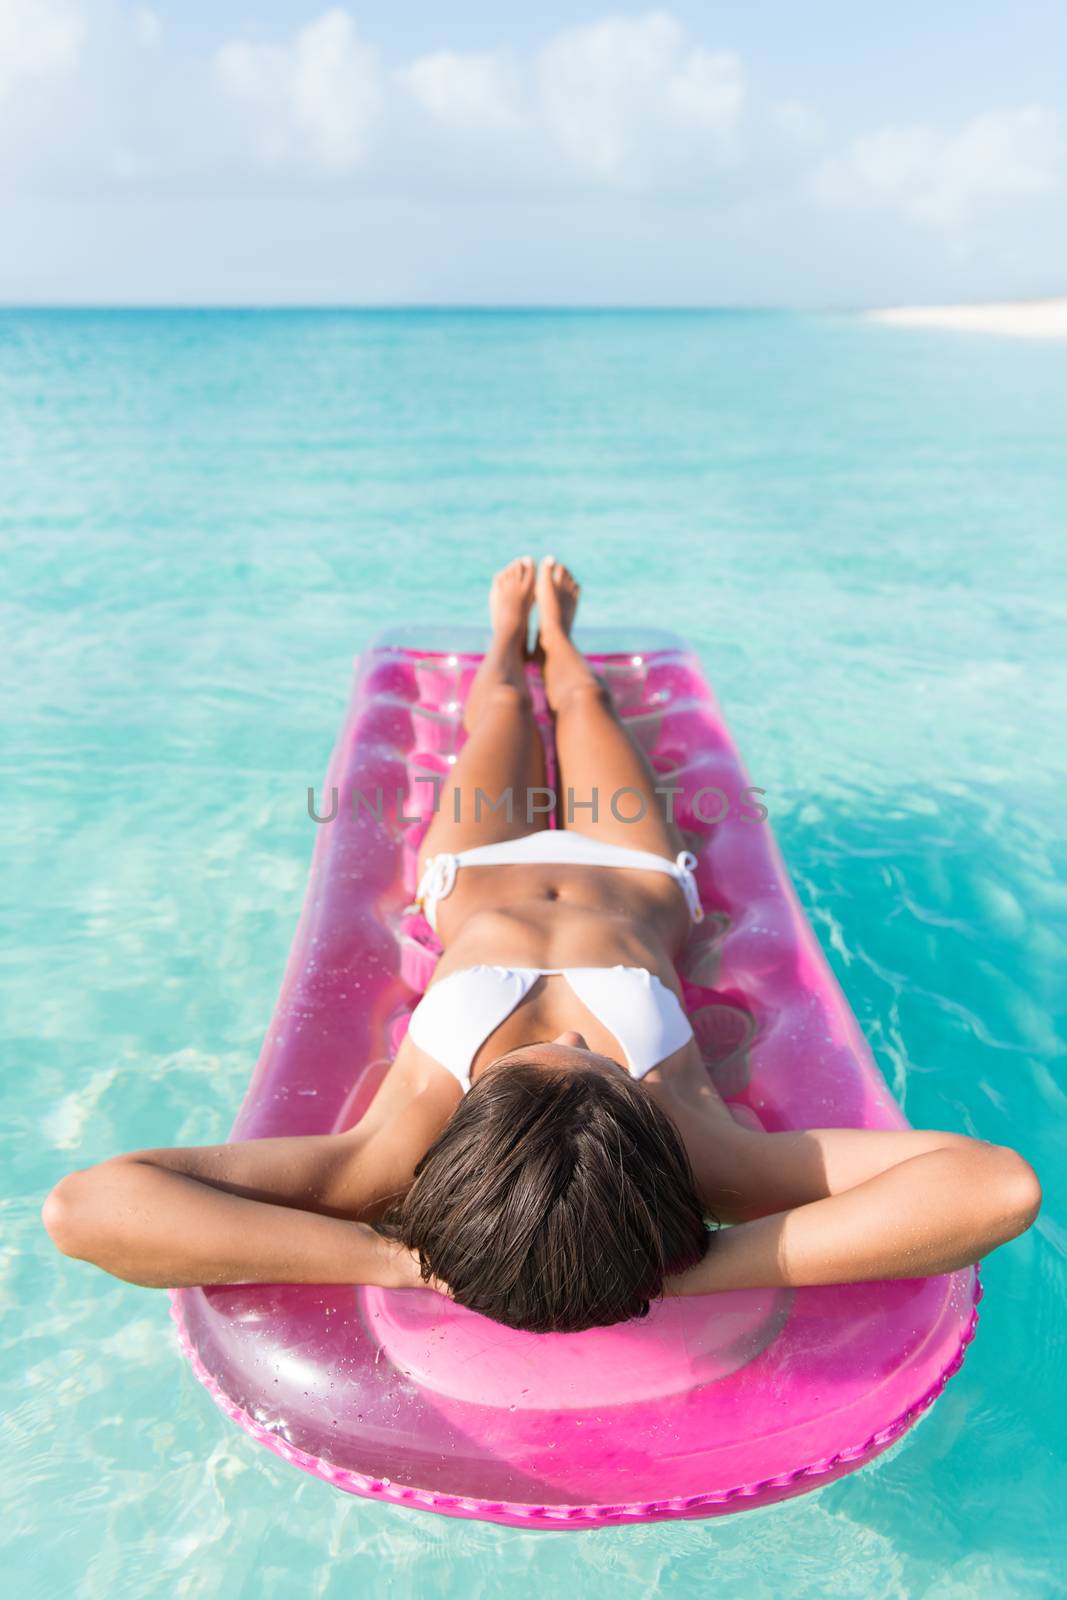 Beach vacation woman relaxing in pink plastic pool toy air bed float floating on ocean water on tropical vacation seen from above lying down lounging and sunbathing.